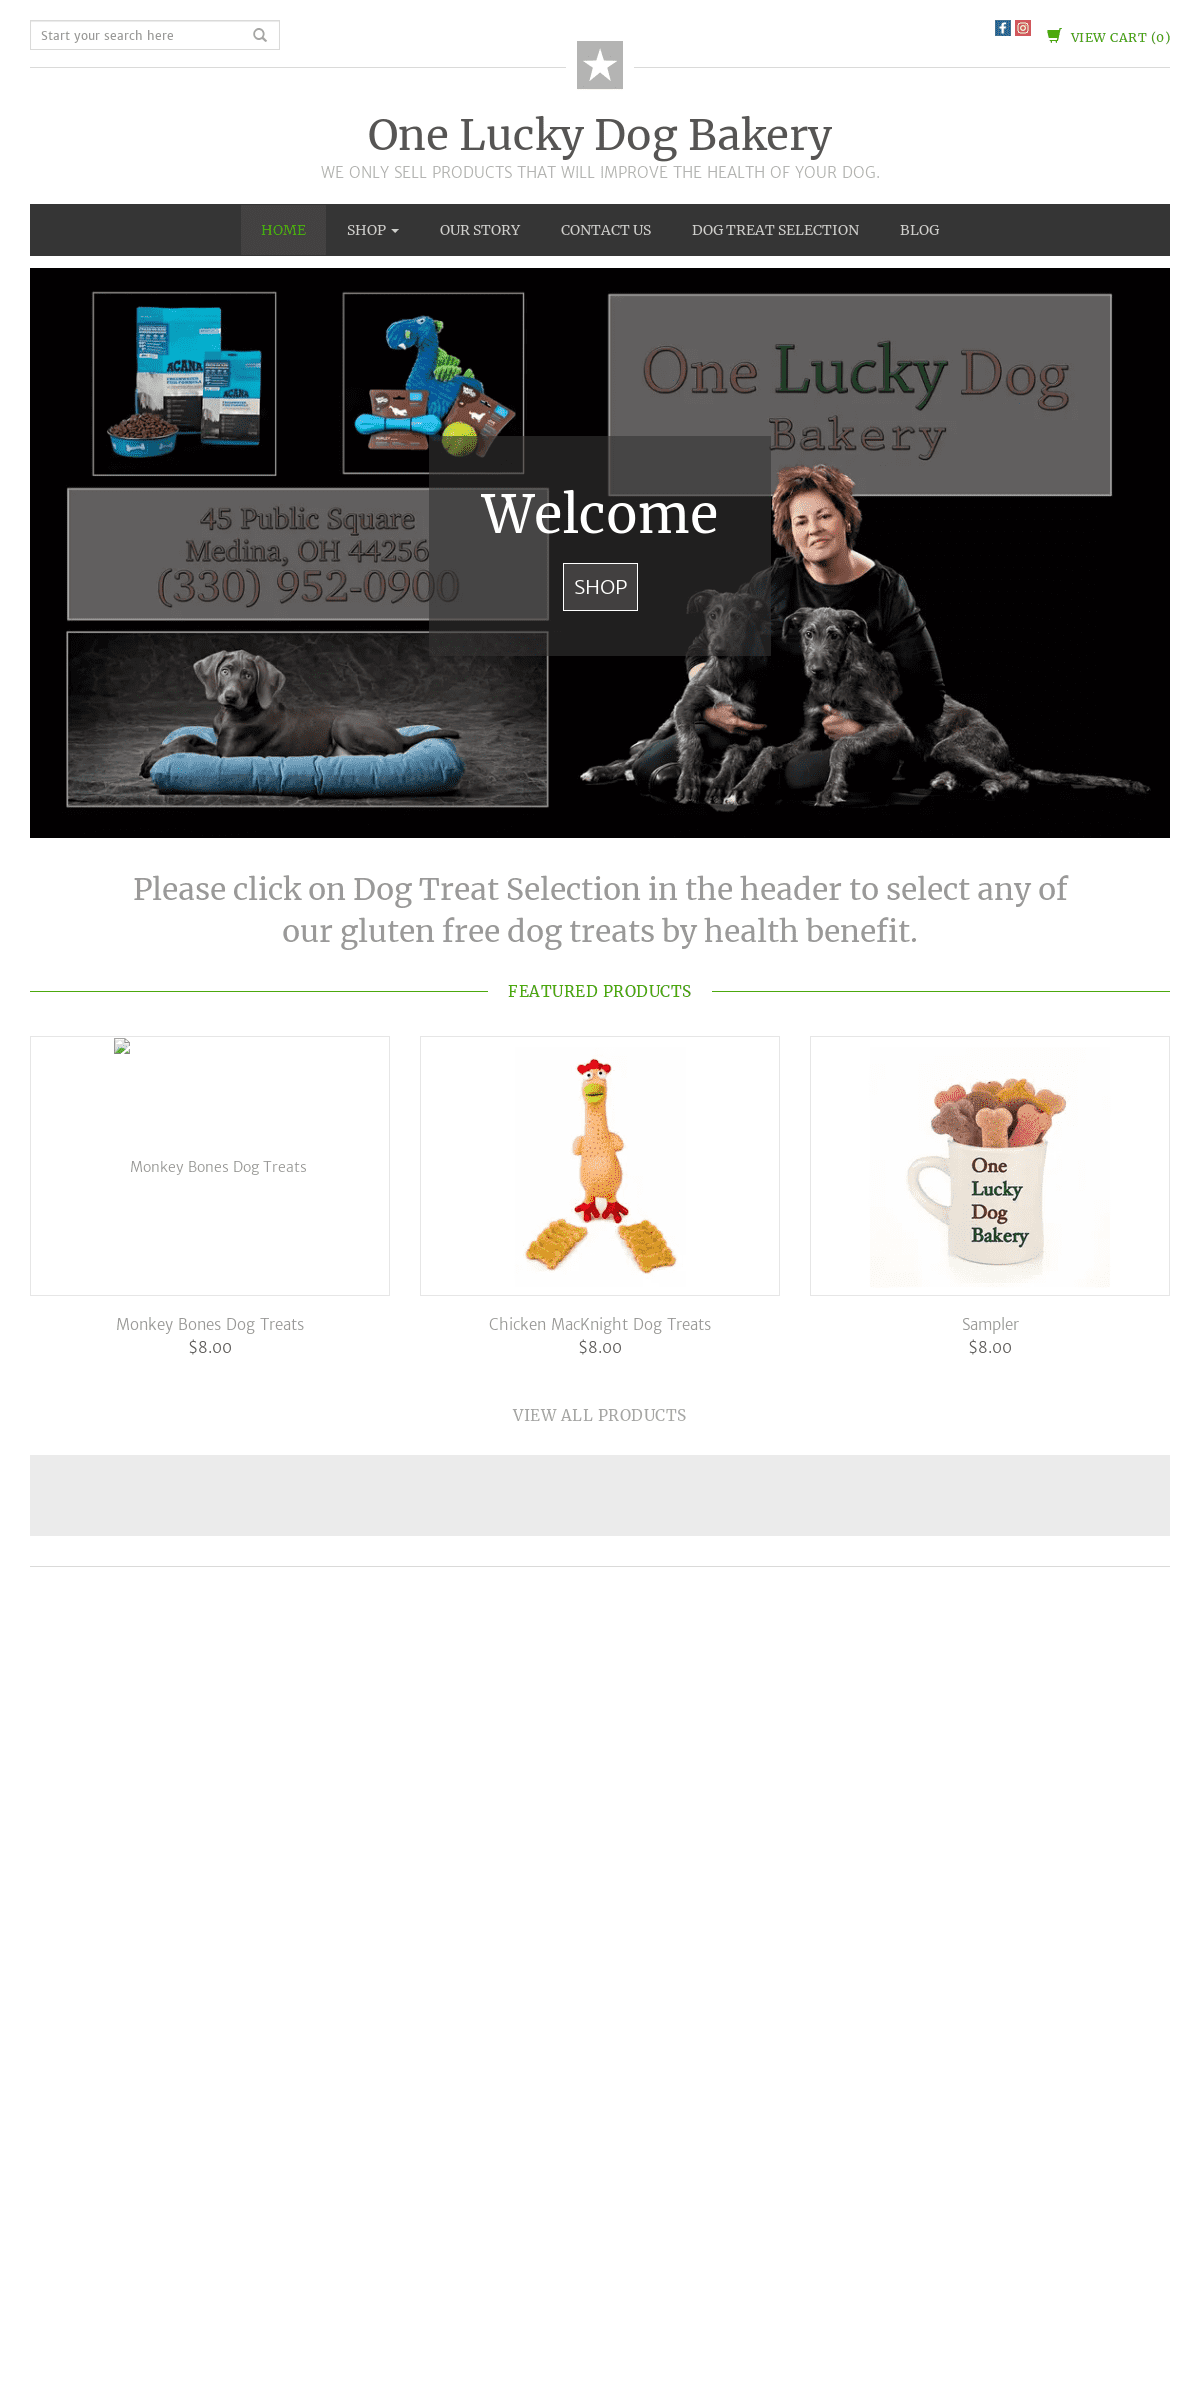 A complete backup of oneluckydogbakery.com